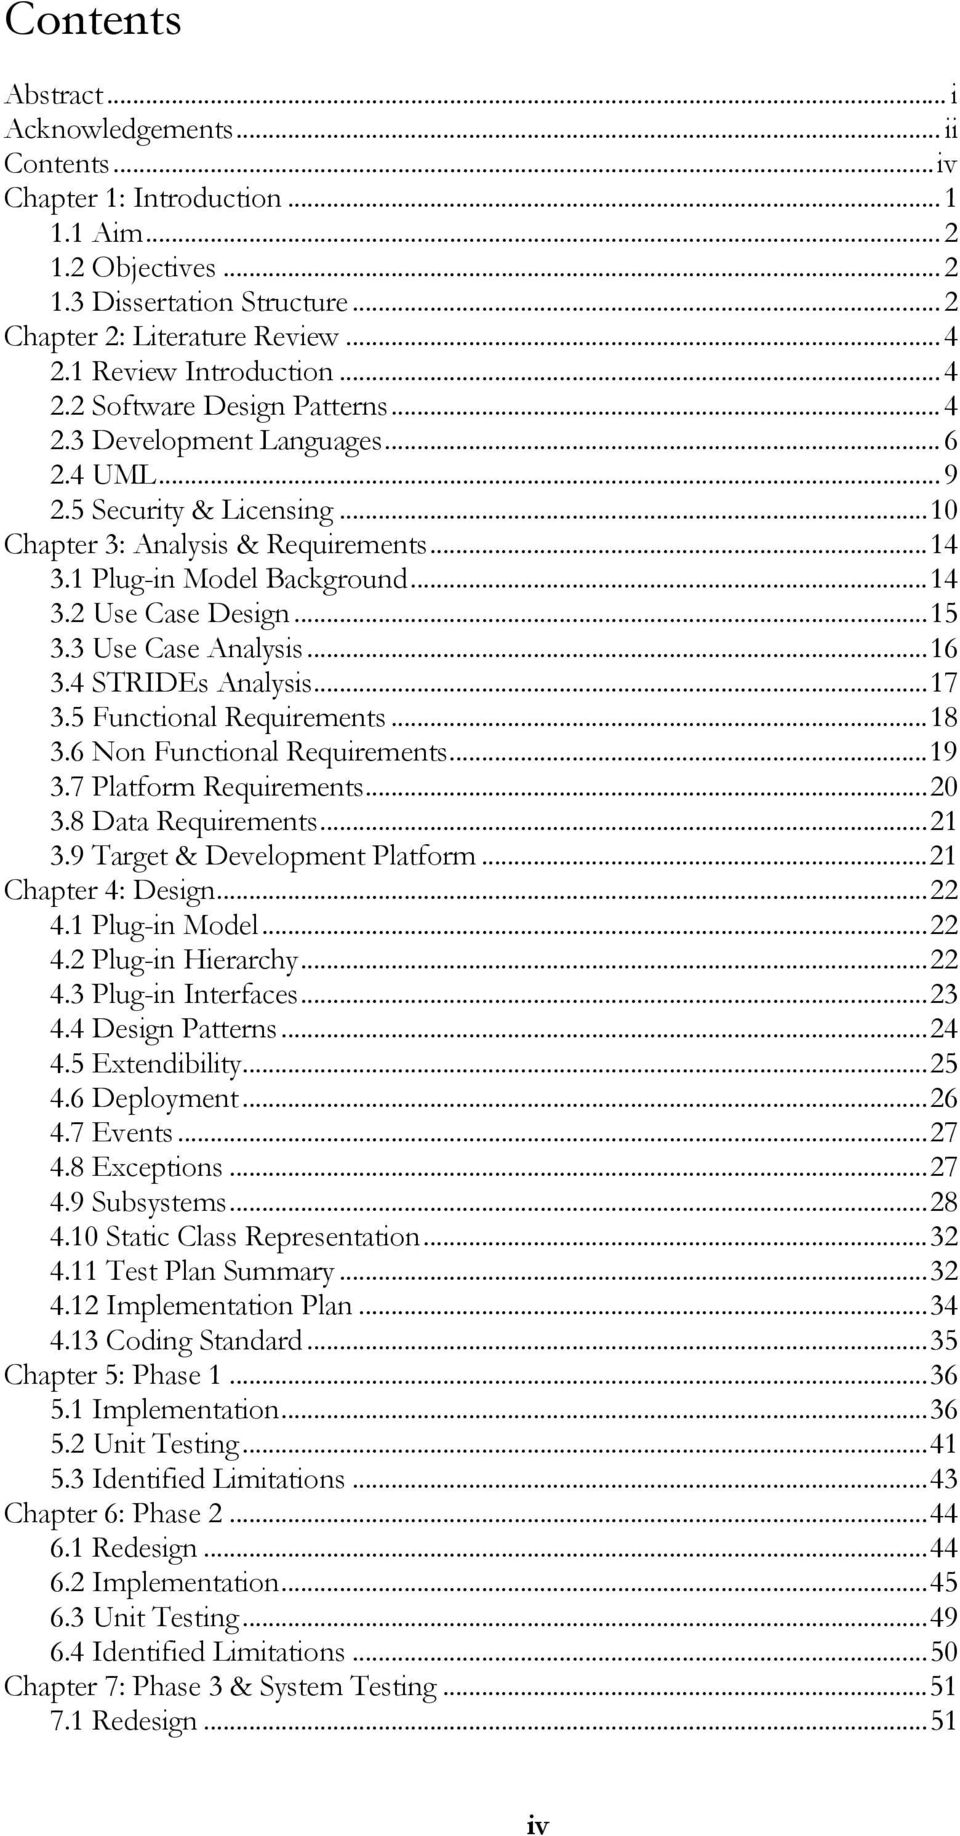 ..14 3.2 Use Case Design...15 3.3 Use Case Analysis...16 3.4 STRIDEs Analysis...17 3.5 Functional Requirements...18 3.6 Non Functional Requirements...19 3.7 Platform Requirements...20 3.